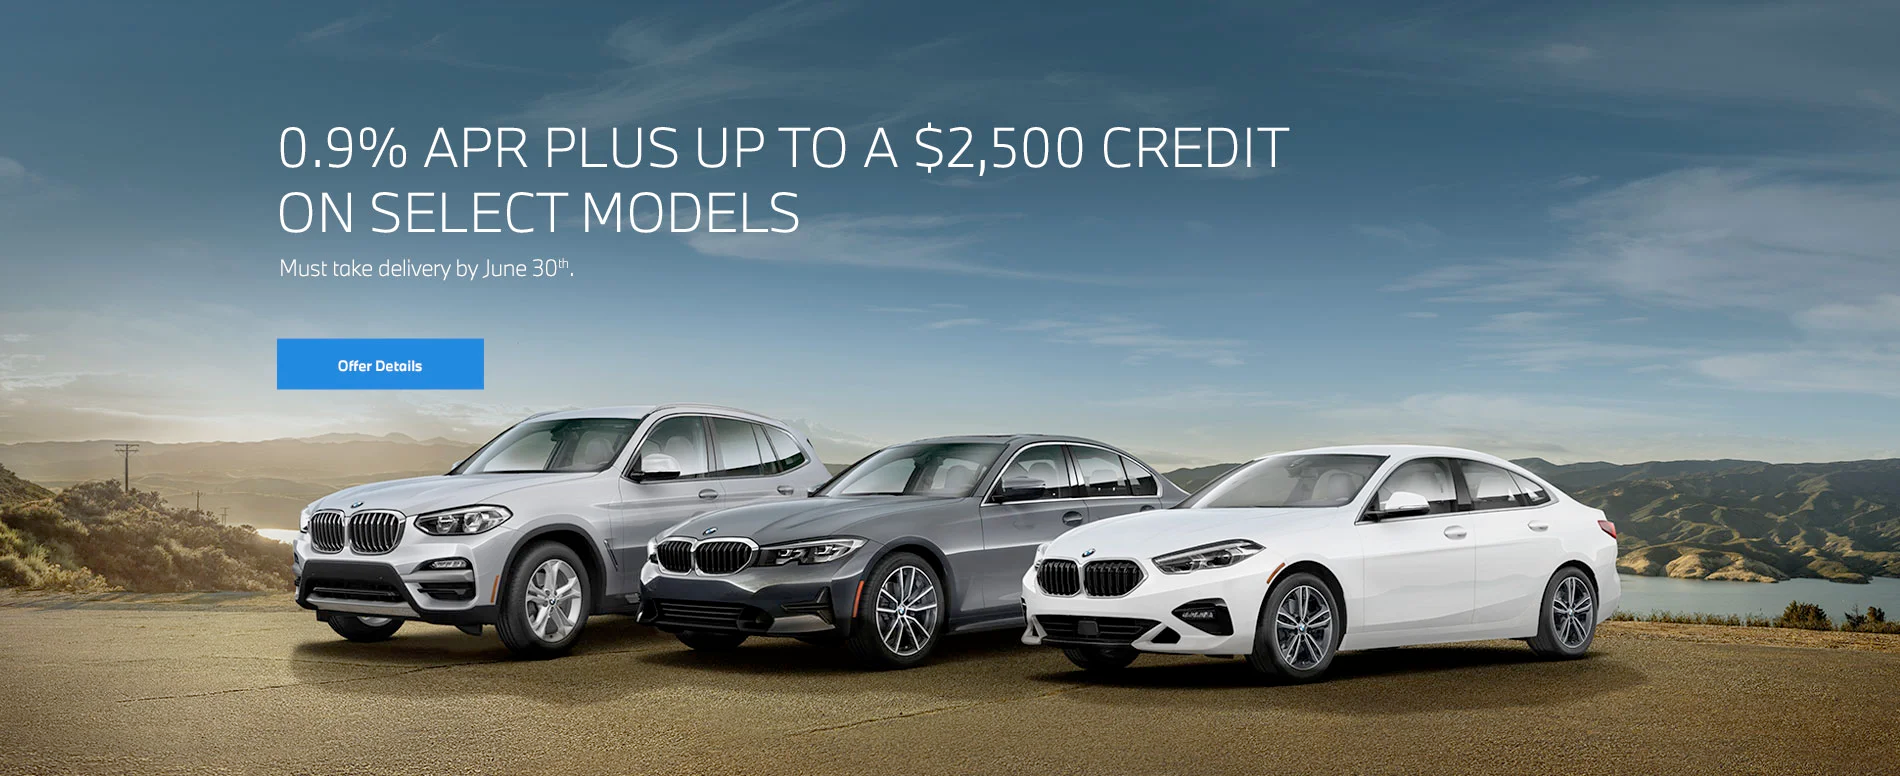 Discounts for Dad this Father's Day at Passport BMW | Marlow Heights